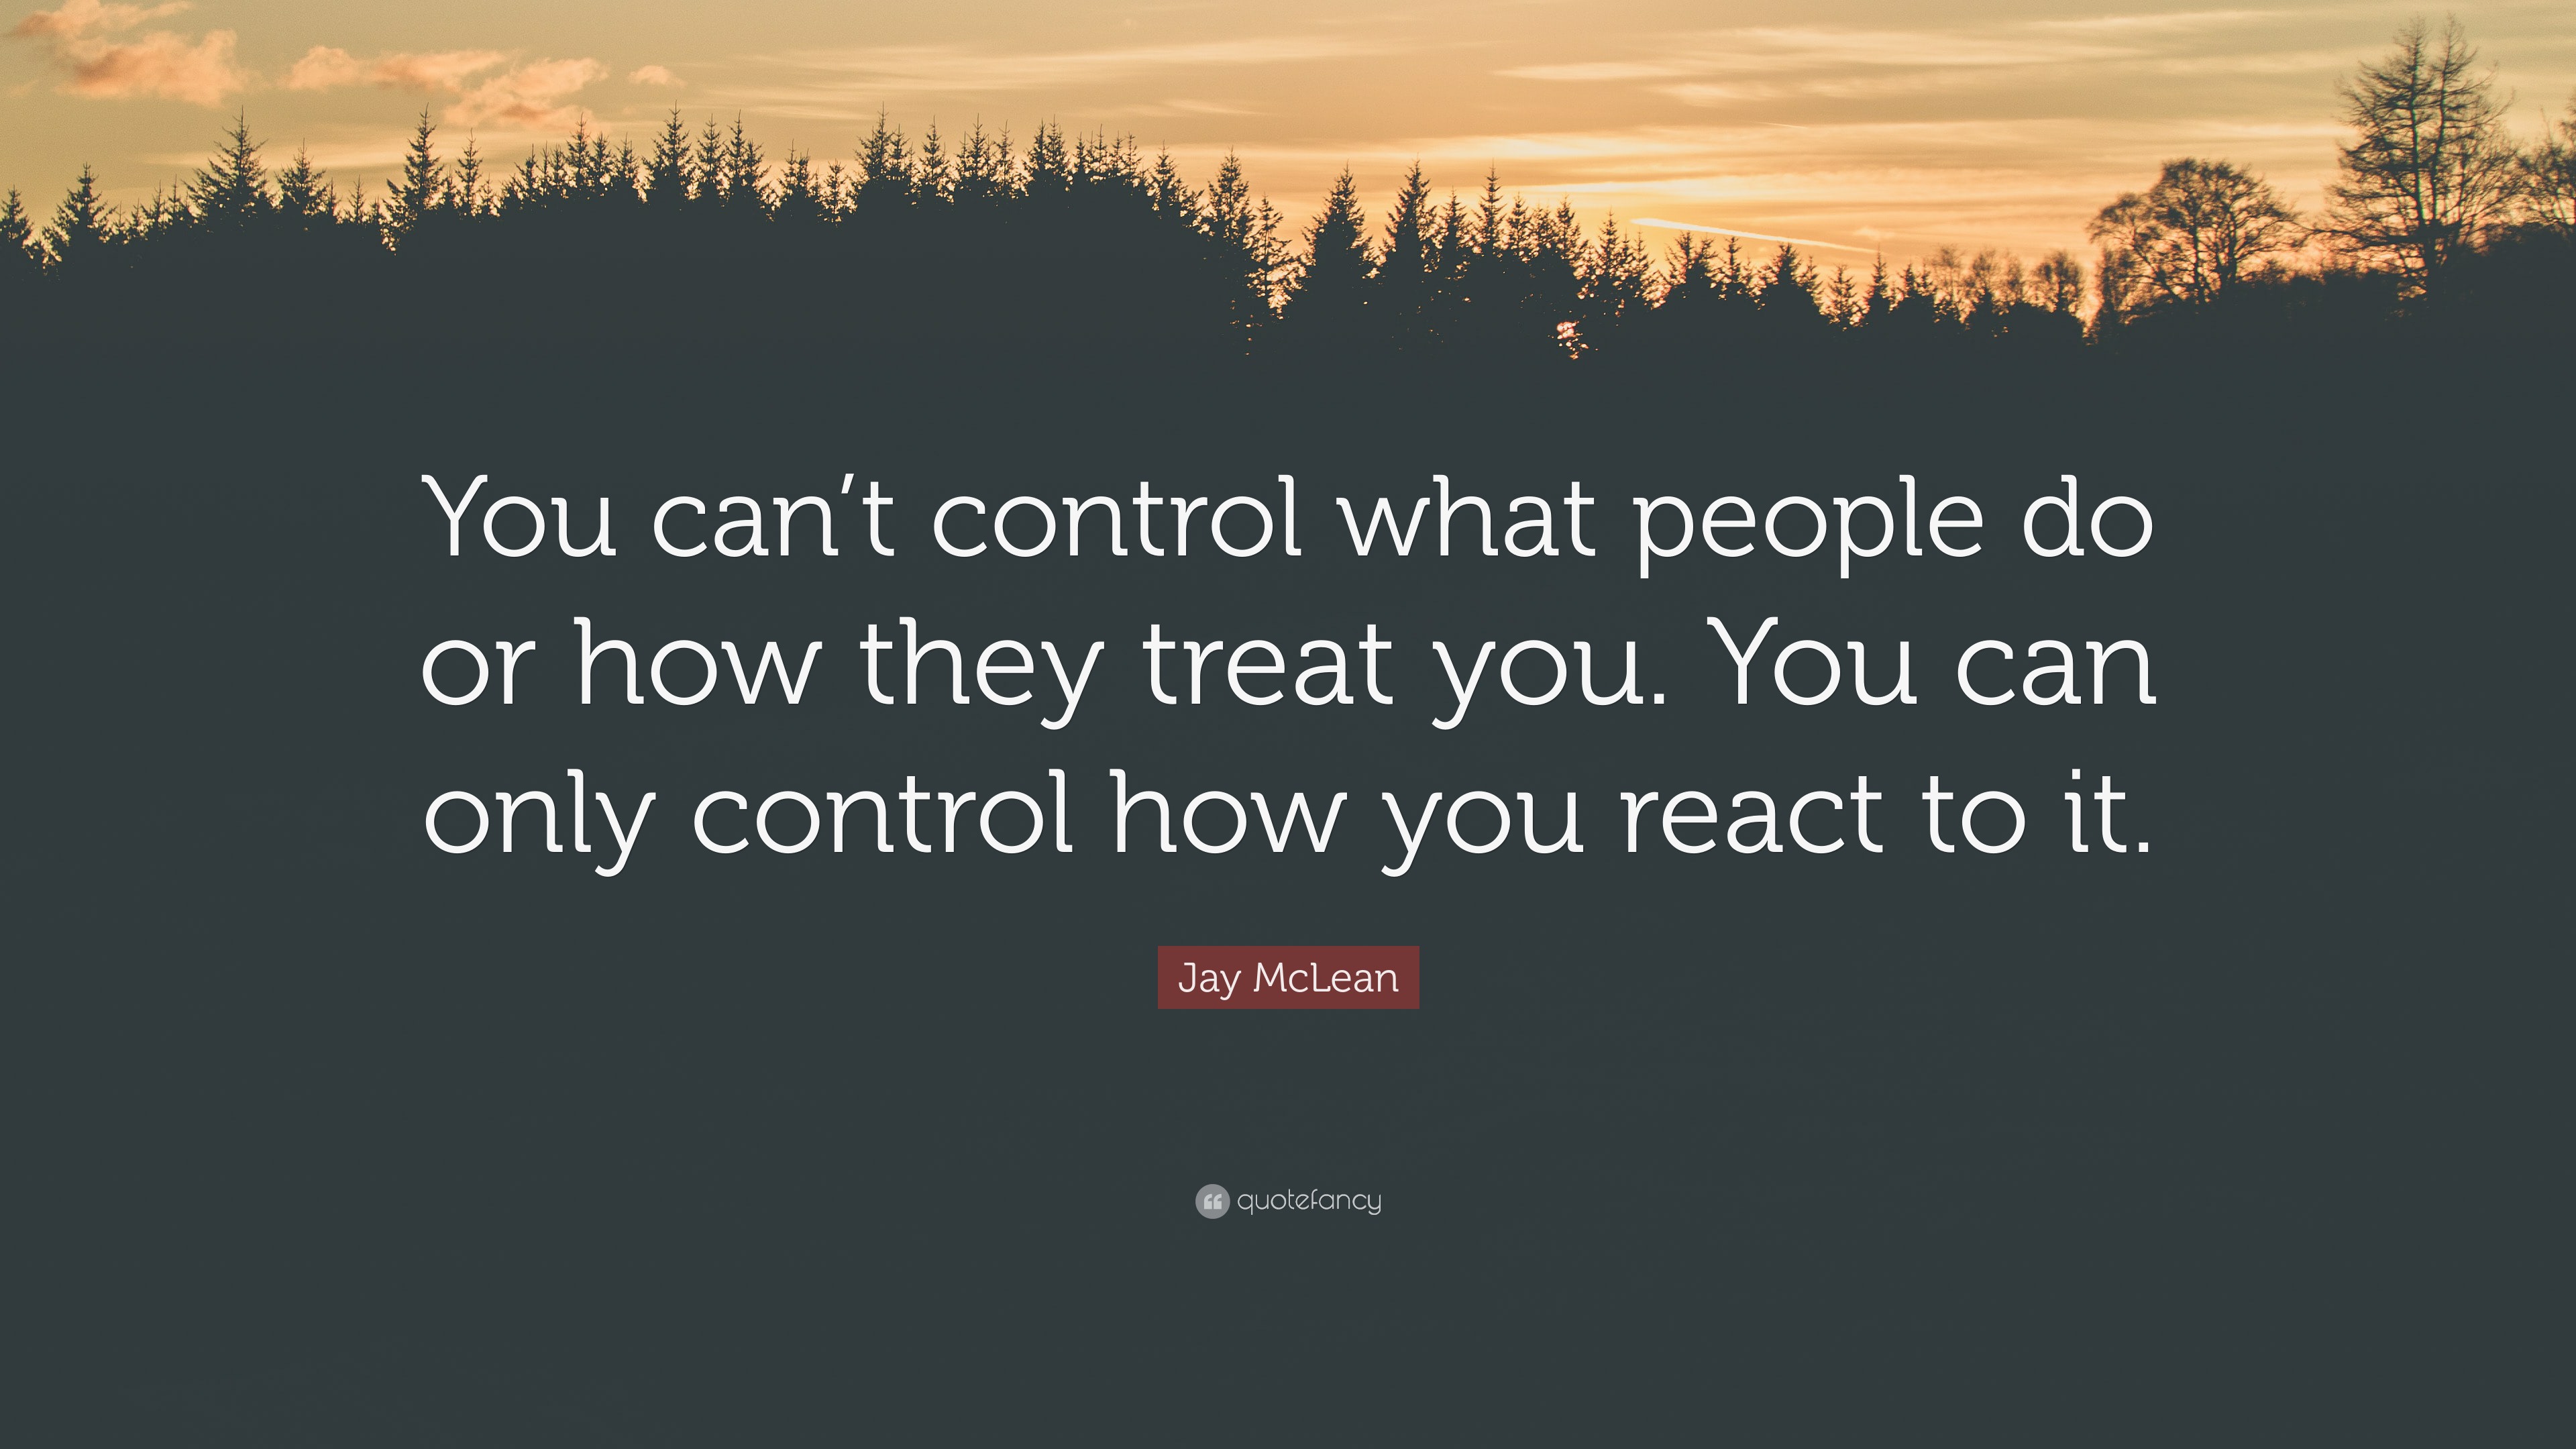 Jay McLean Quote You Cant Control What People Do Or How They Treat You You Can Only Control